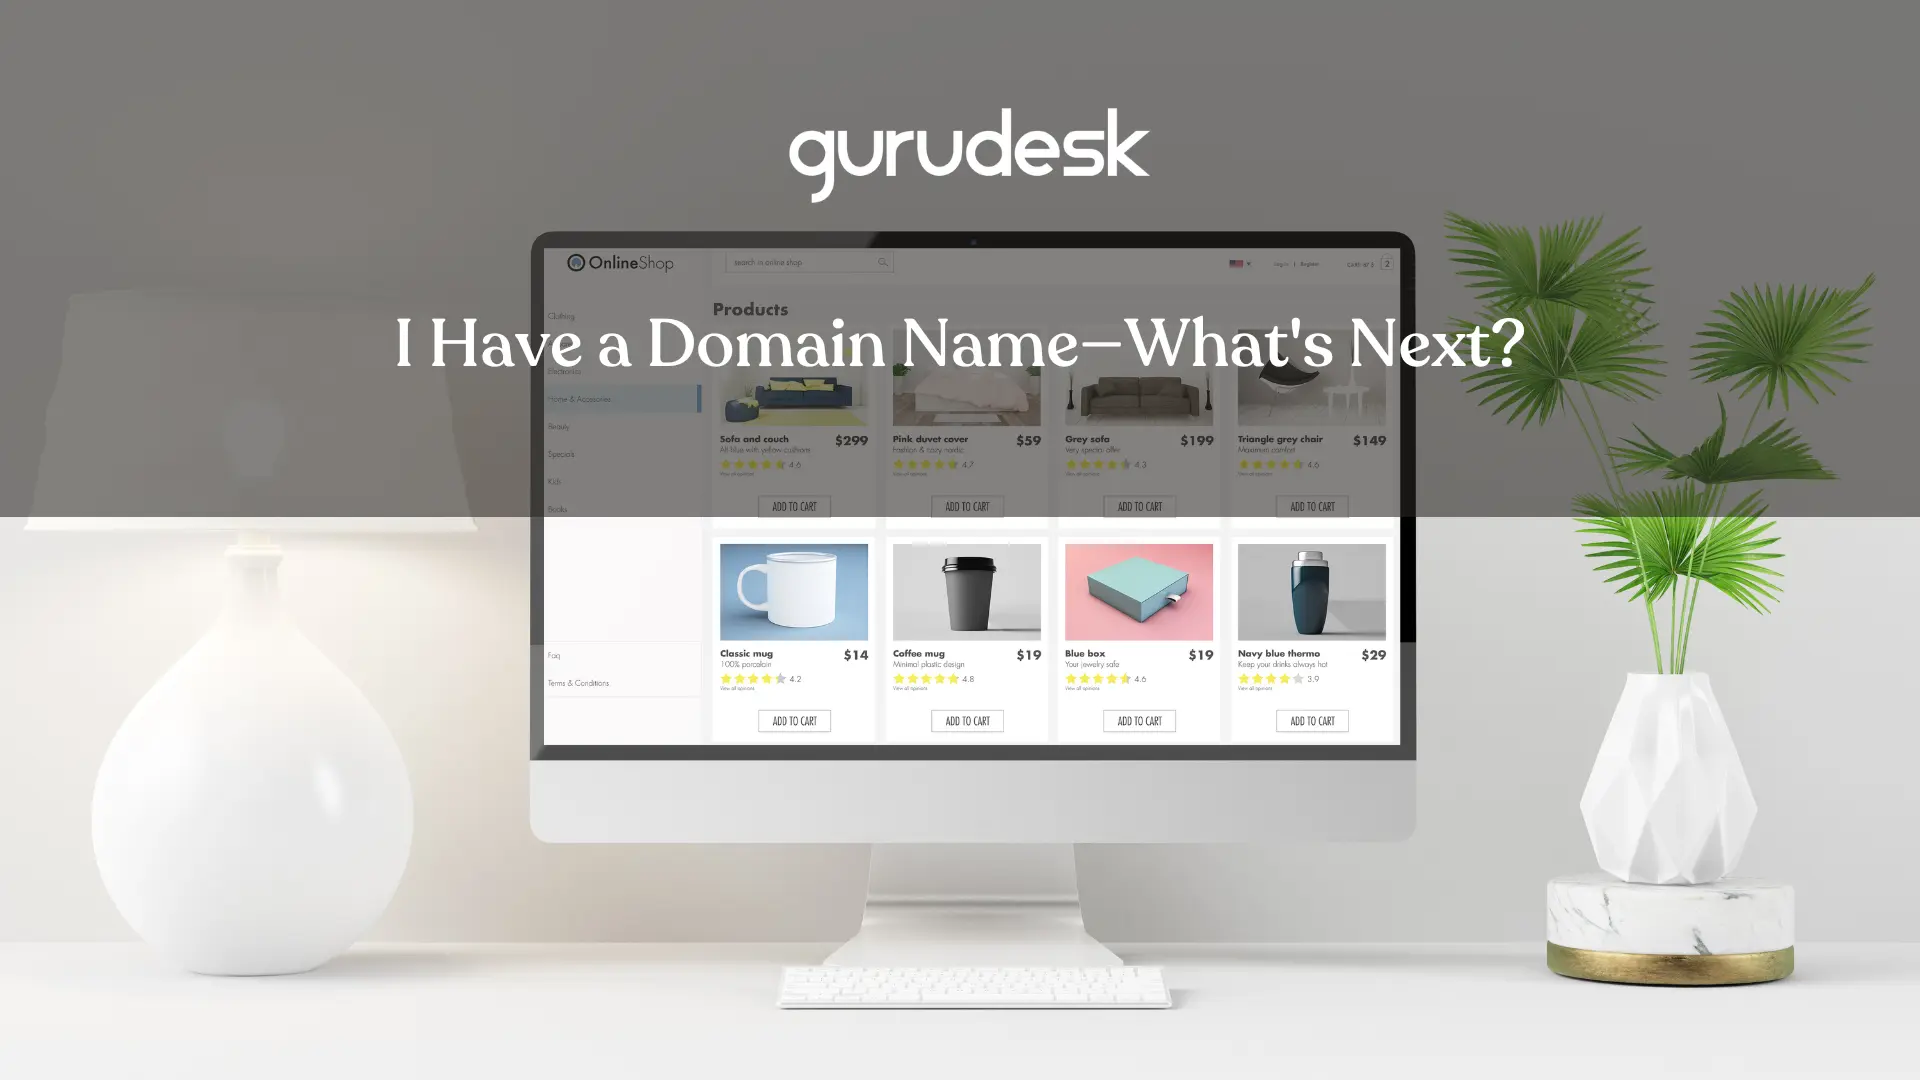 I have a domain name - what's next?